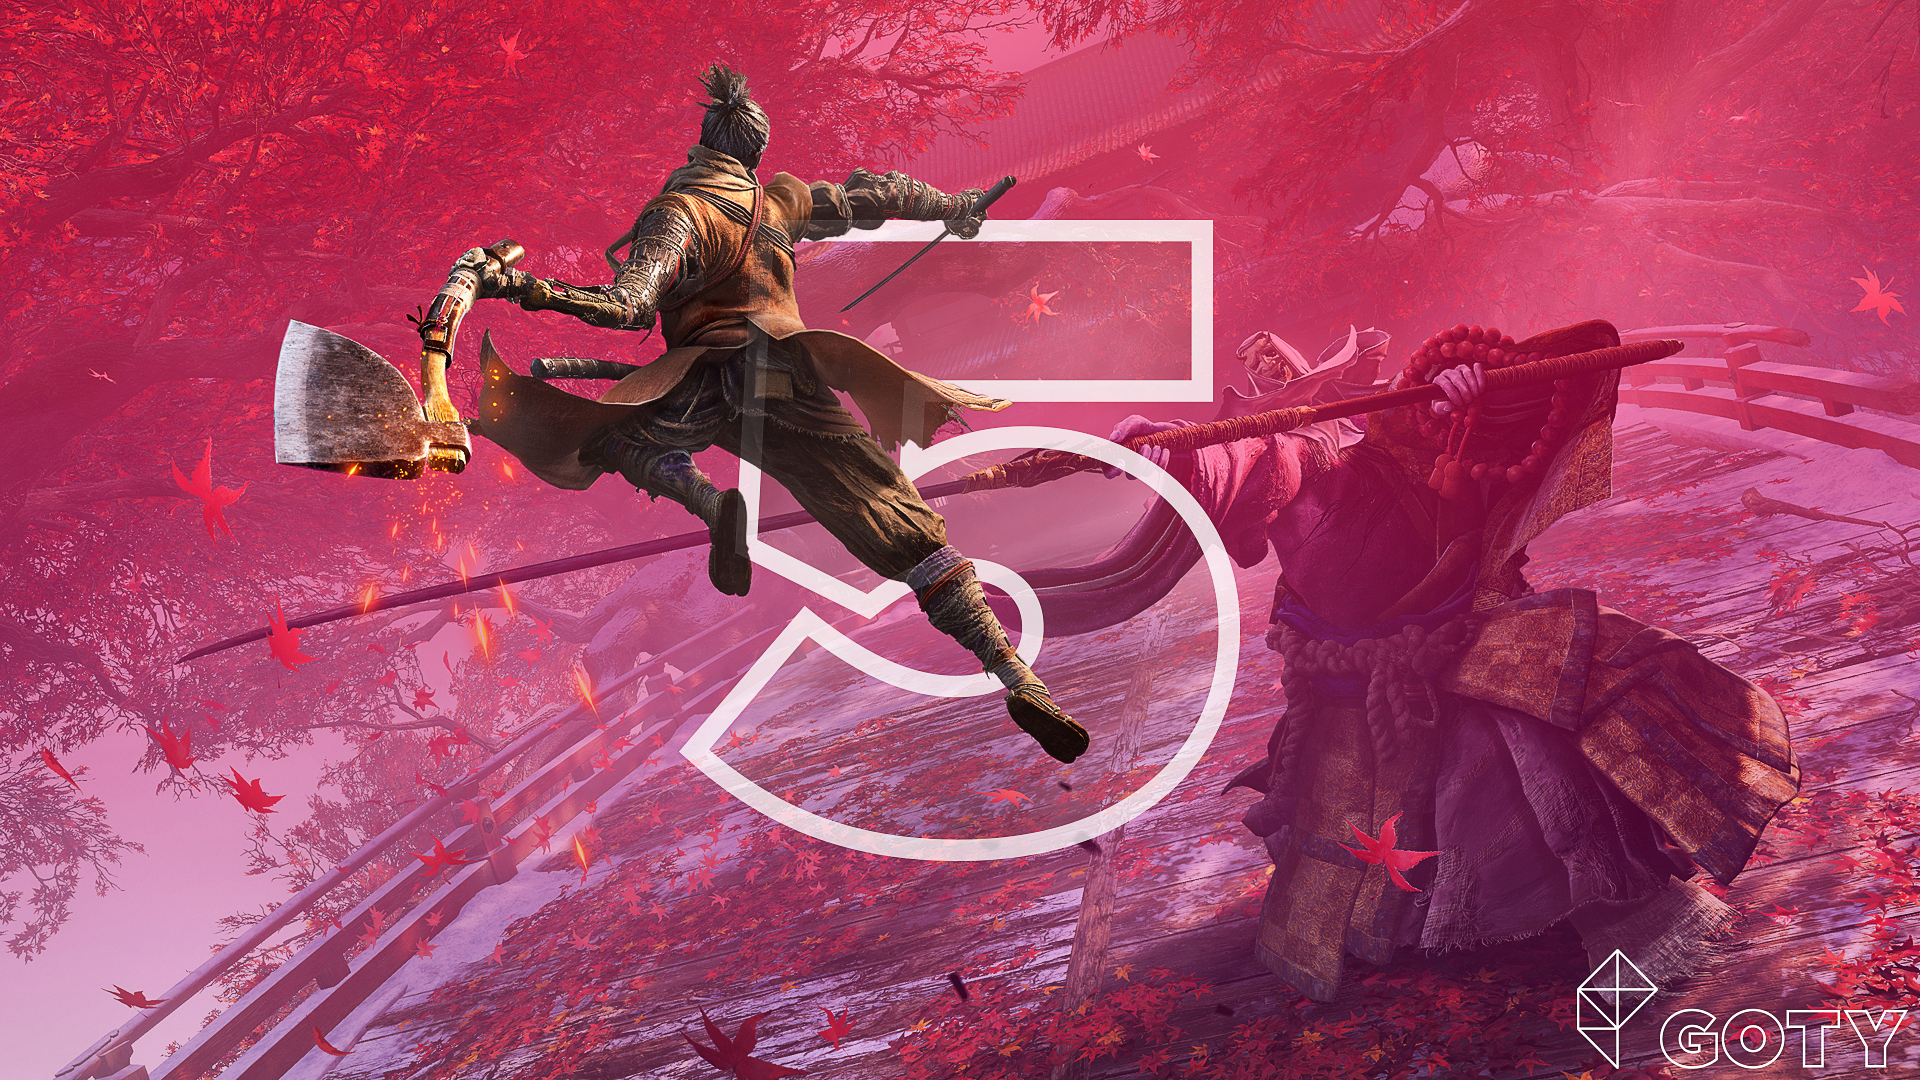 The character Wolf leaping in the air and about bring down his axe on a masked assailant in s still from Sekiro: Shadows Die Twice game